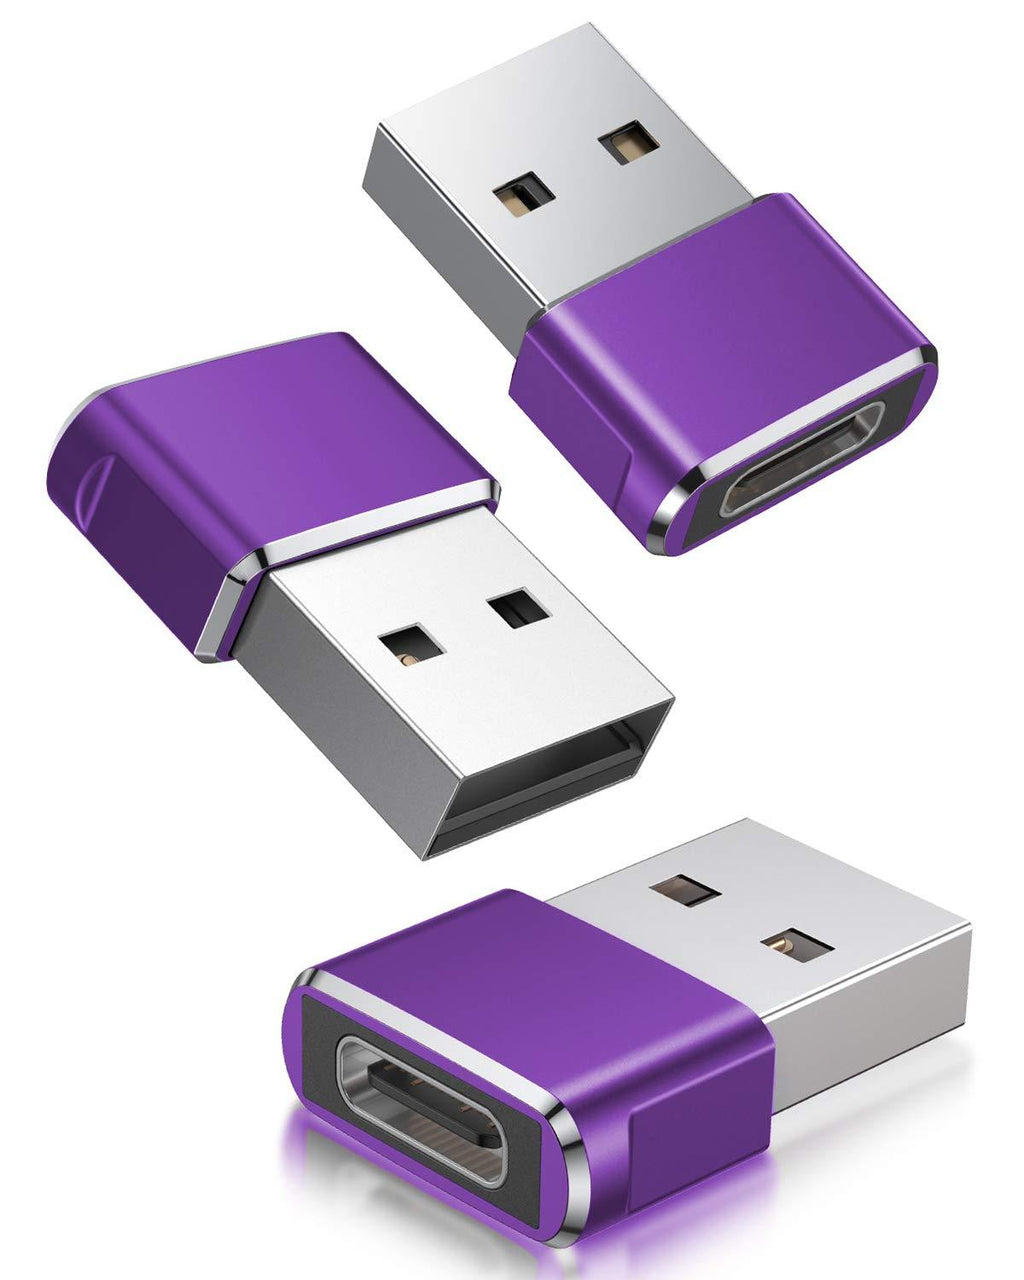 USB C Female to USB Male Adapter (3 Pack),Type C to USB A Charger Cable Adapter for iPhone 11 12 Mini Pro Max,Airpods iPad,Samsung Galaxy Note 10 20 S20 Plus S20+ 20+ Ultra,Microsoft Surface Duo PURPLE - LeoForward Australia